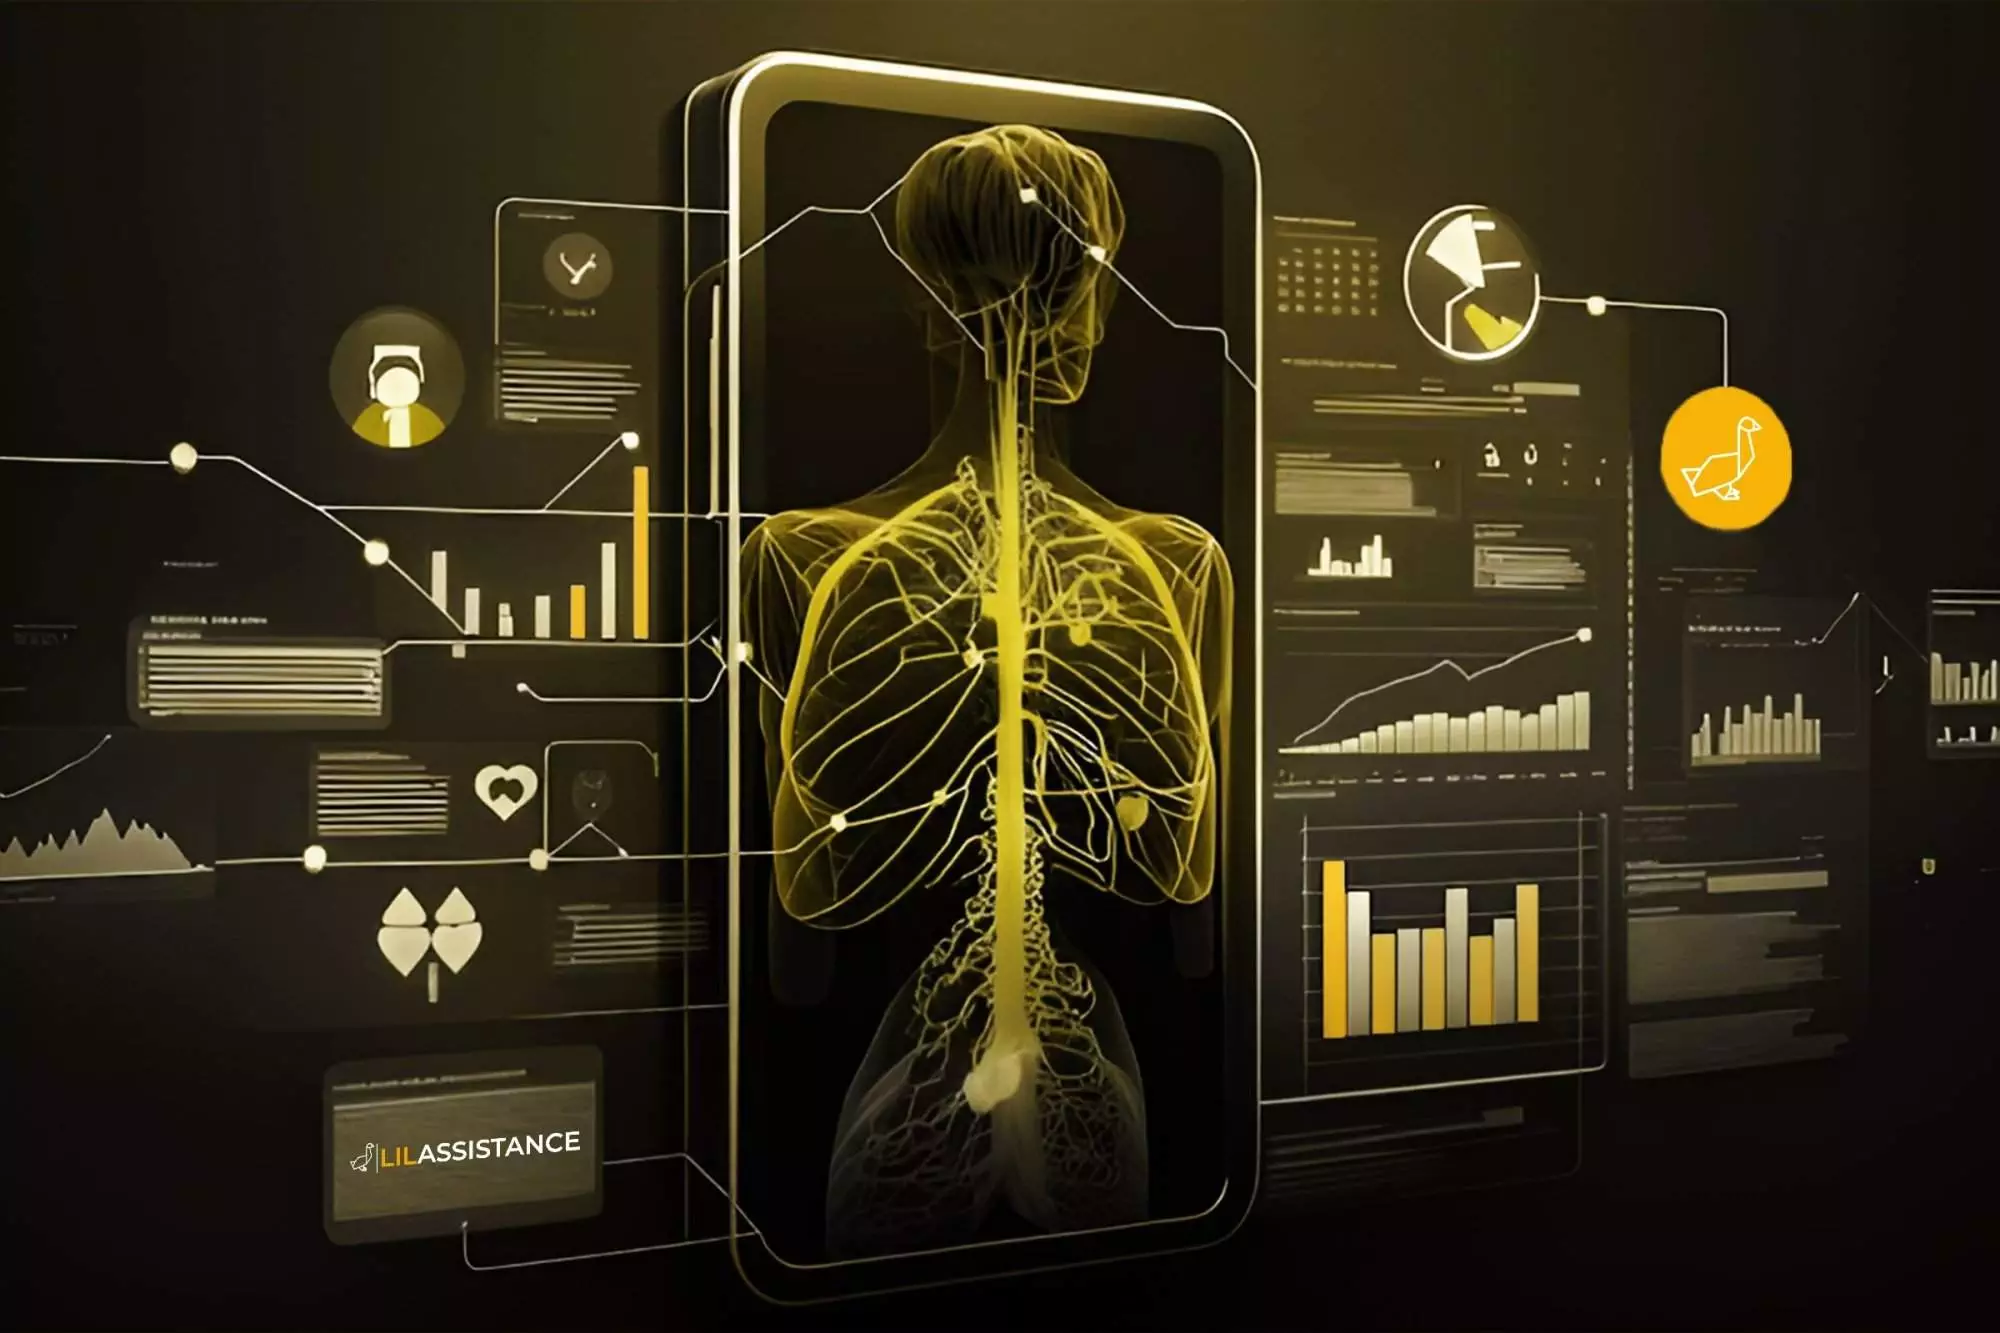 Medical outsourcing concept with digital health data visualizations on a smartphone.